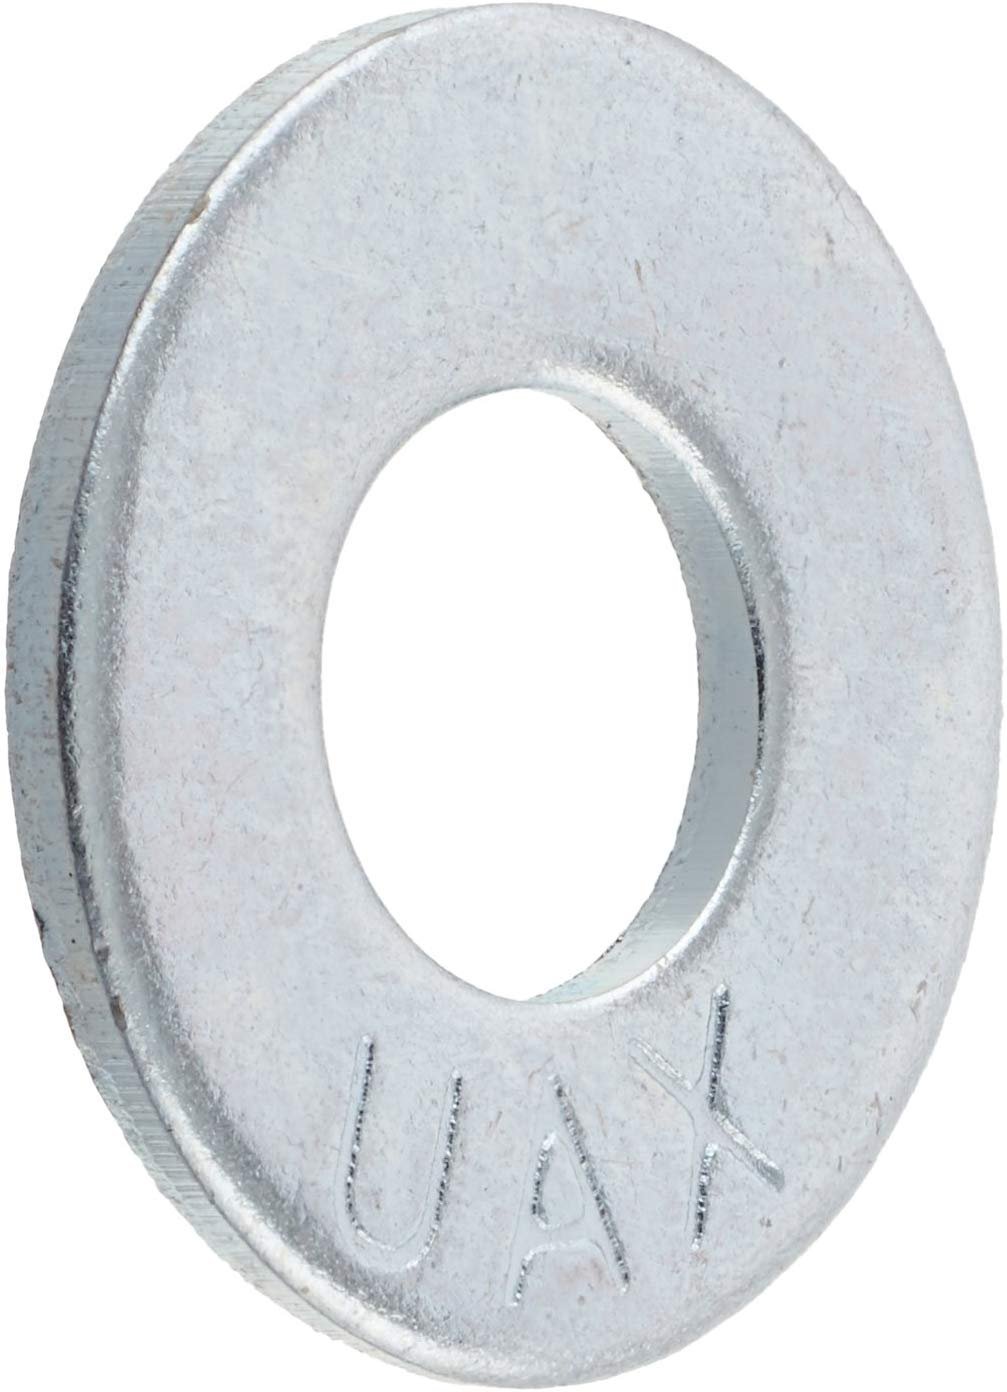 The Hillman Group 280054 Number-10 Flat Washer, 100-Pack